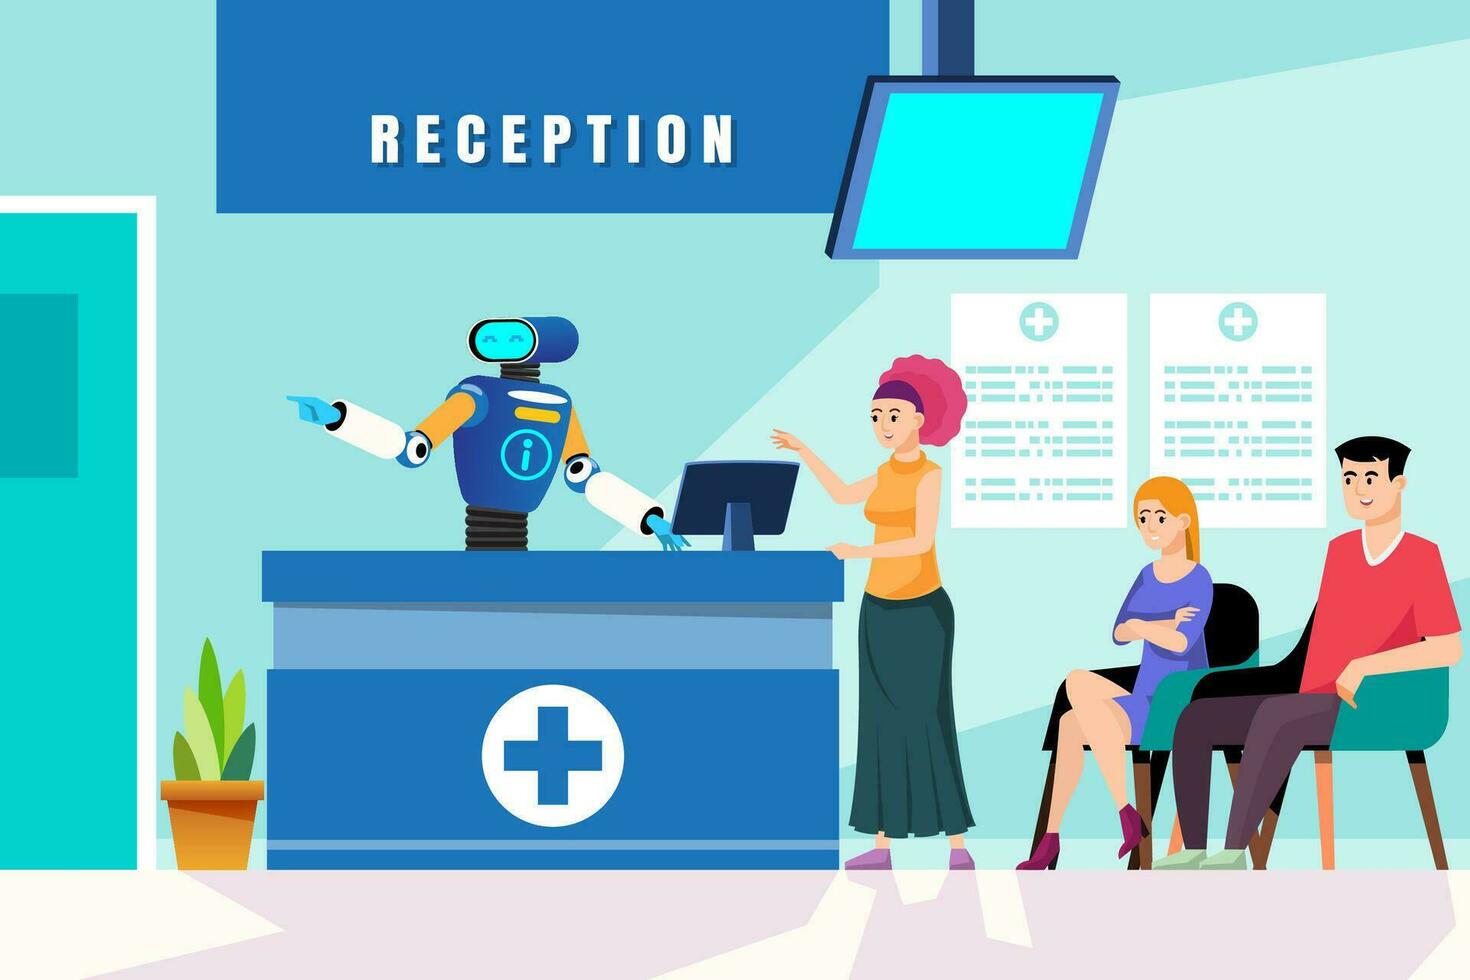 Medical clinic reception vector illustration. Robot doctor and patient sitting at reception desk. Healthcare and medicine. Welcome robots in hospitals for registration